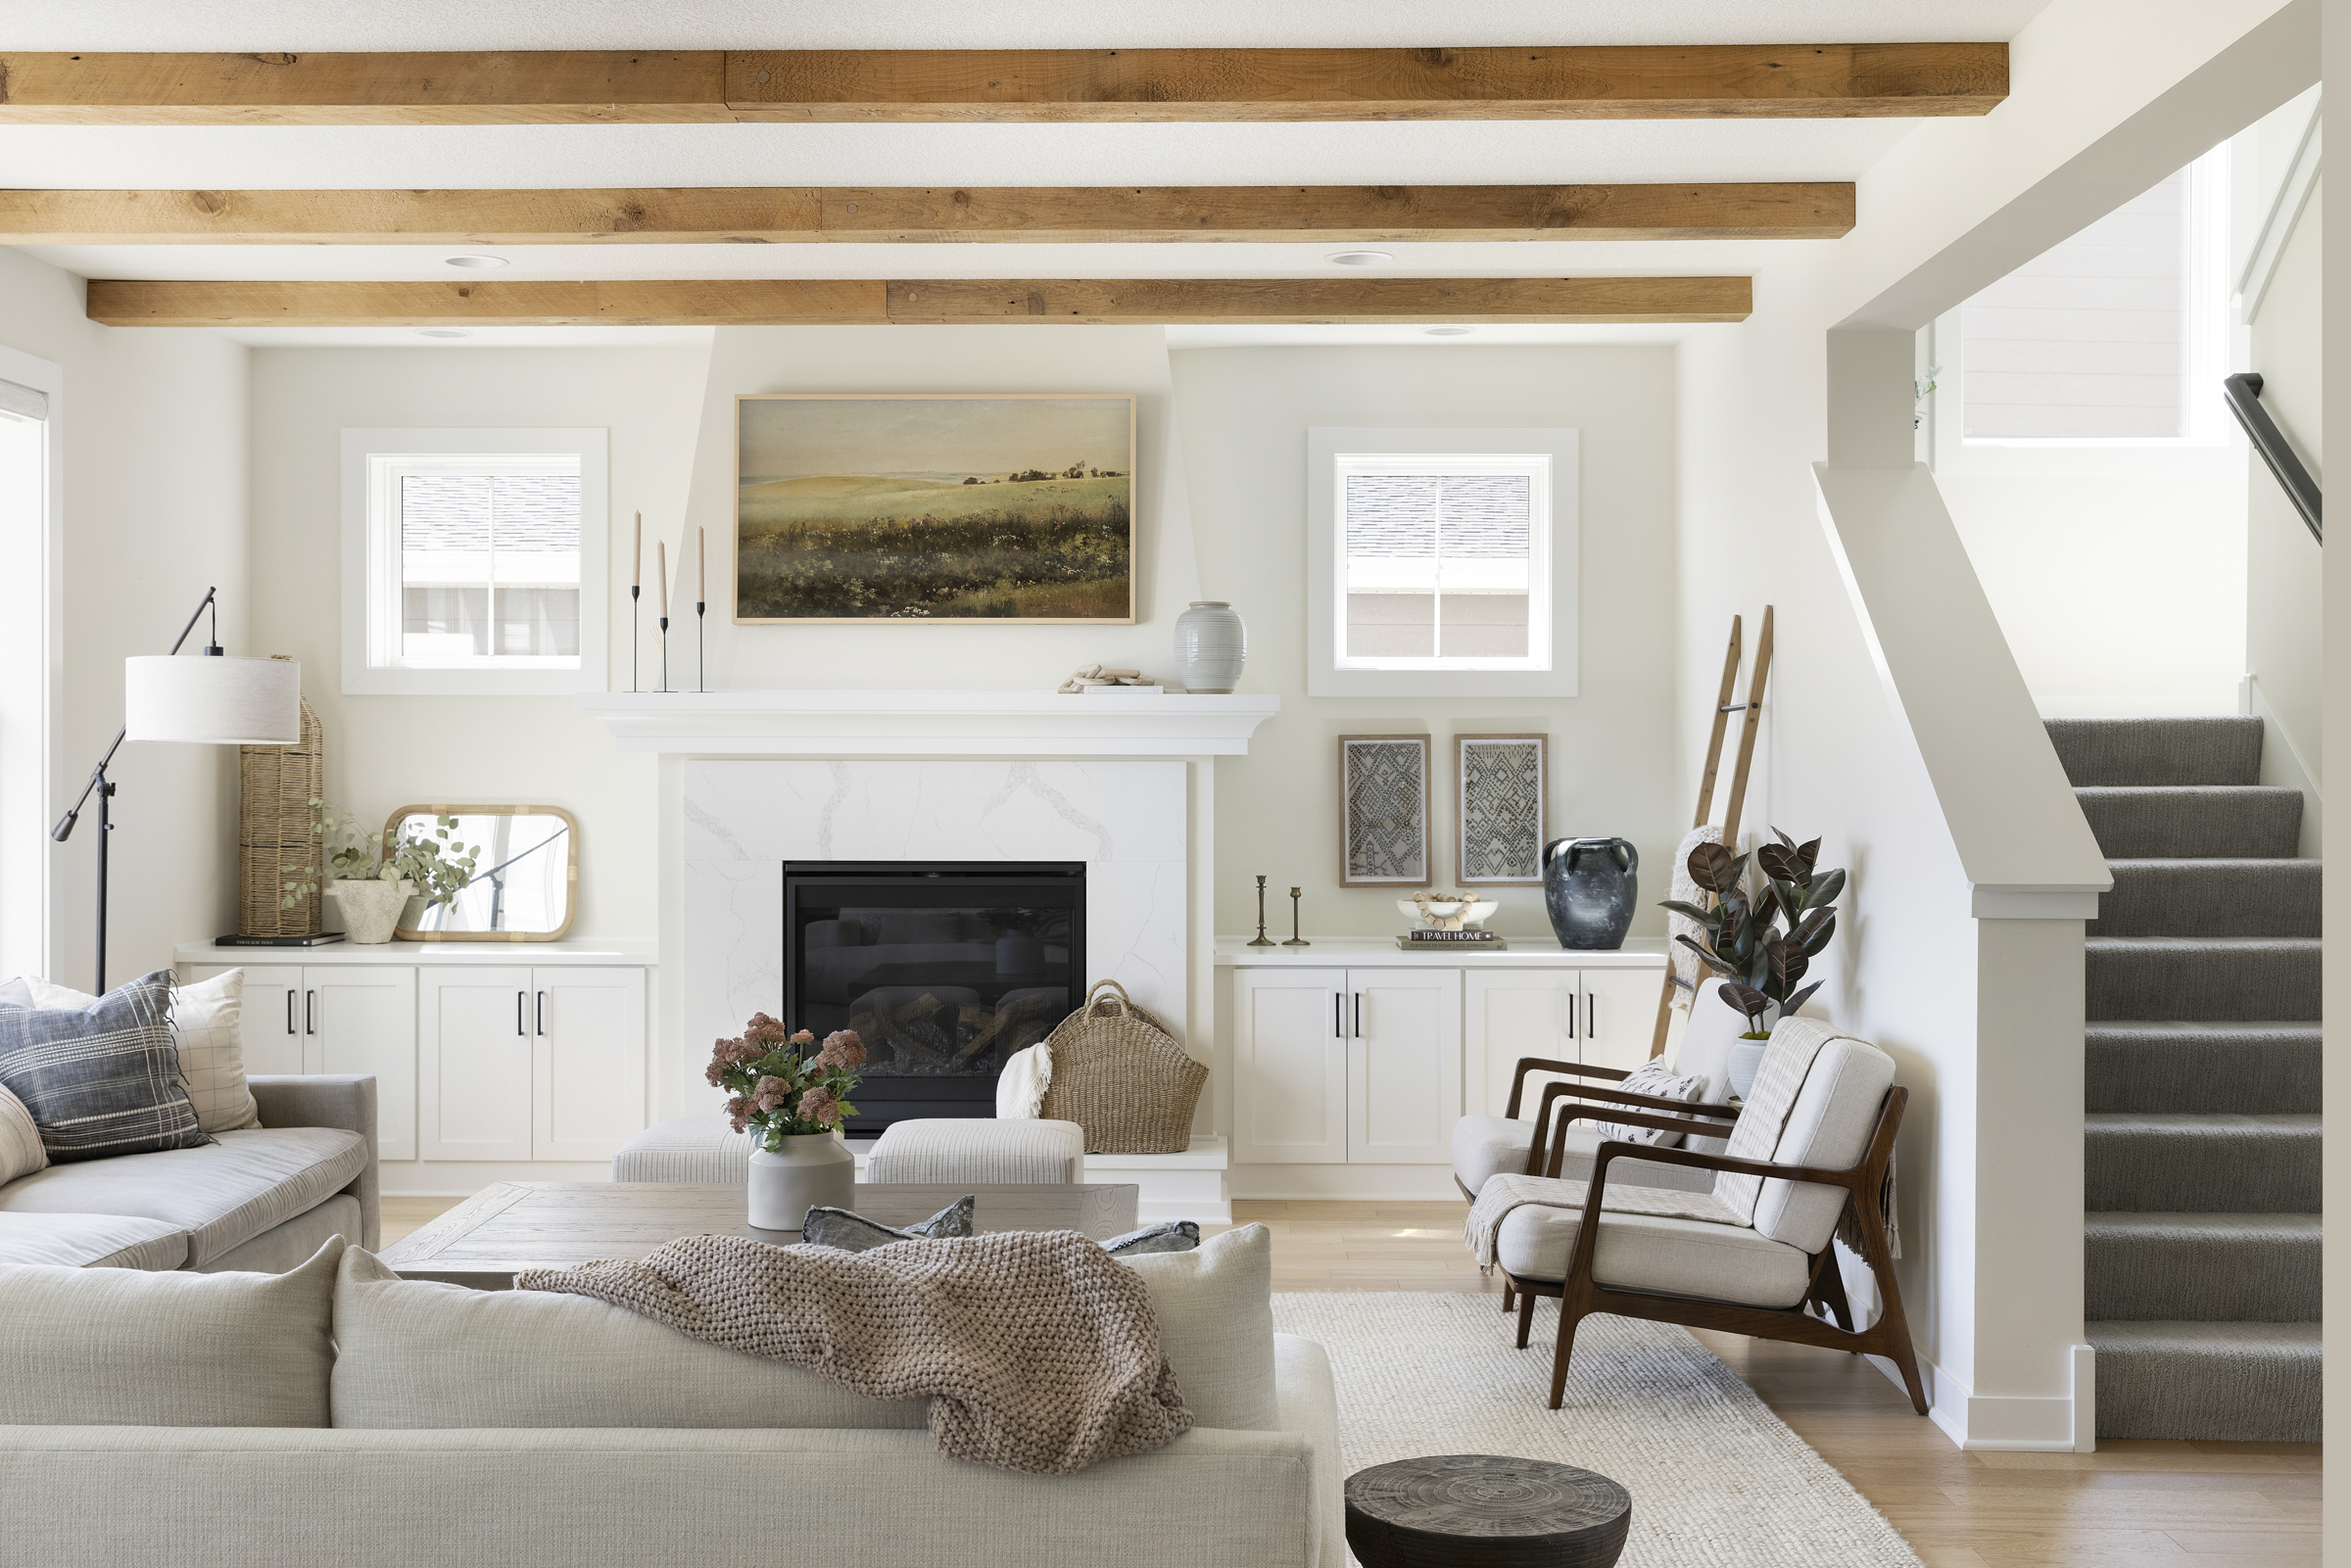 The Art of Styling Homes